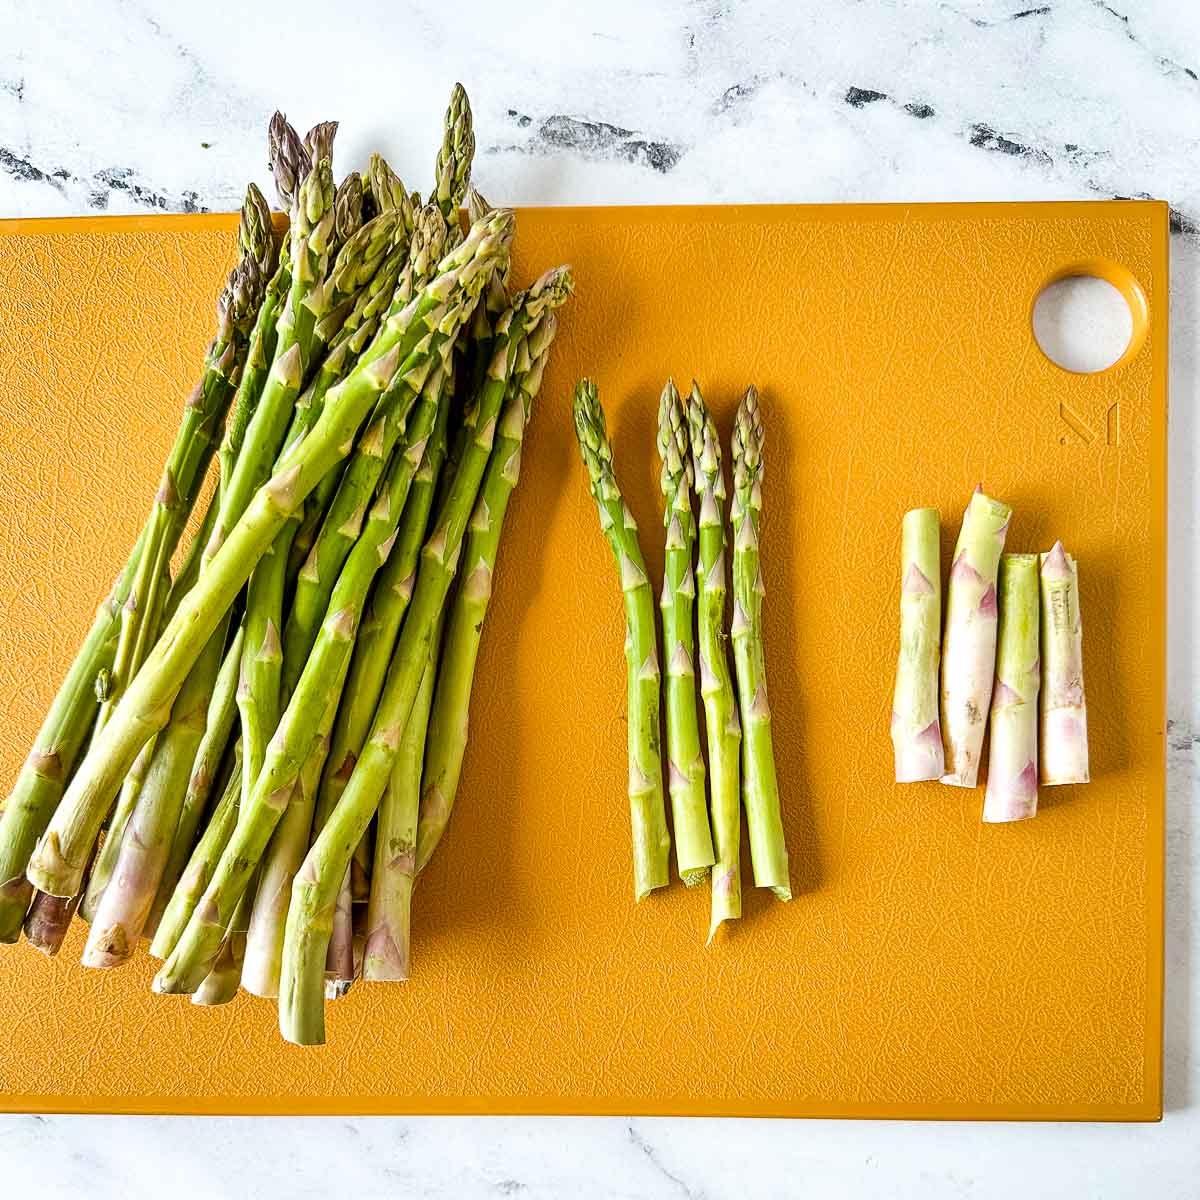 asparagus is trimmed on a yellow cutting board.